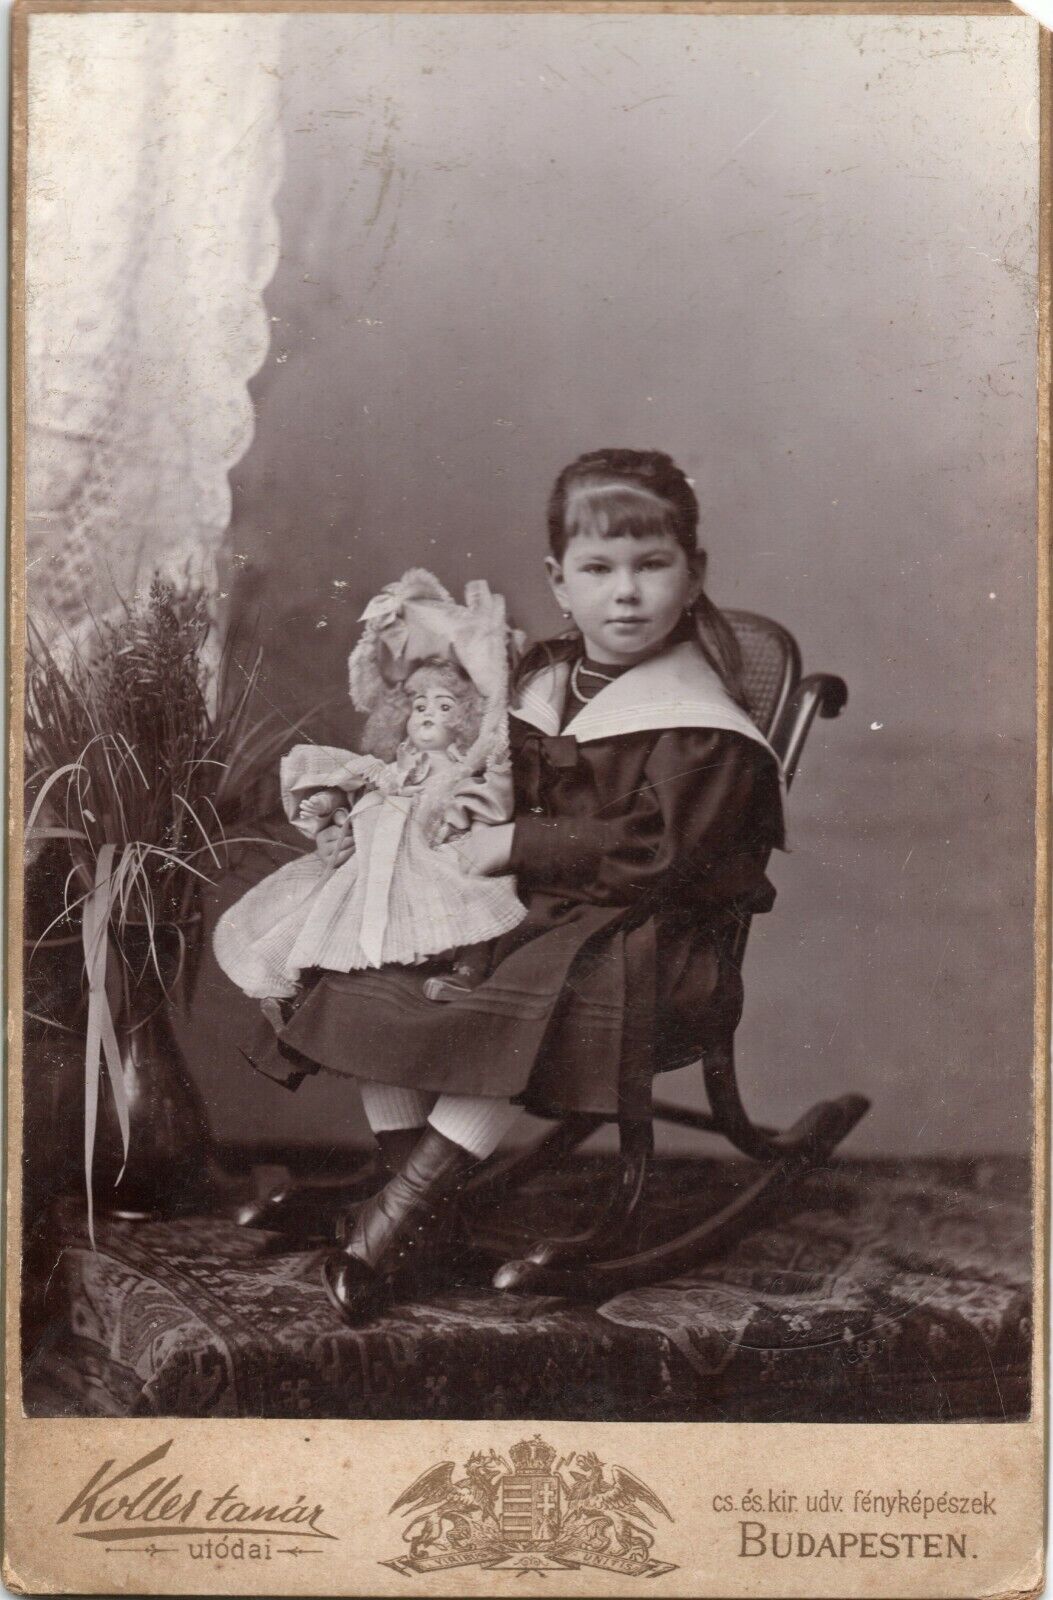 HUNGARY BUDAPEST GIRL WITH ANTIQUE DOLL TOY 1897 CDV PHOTO CABINET Koller Karoly